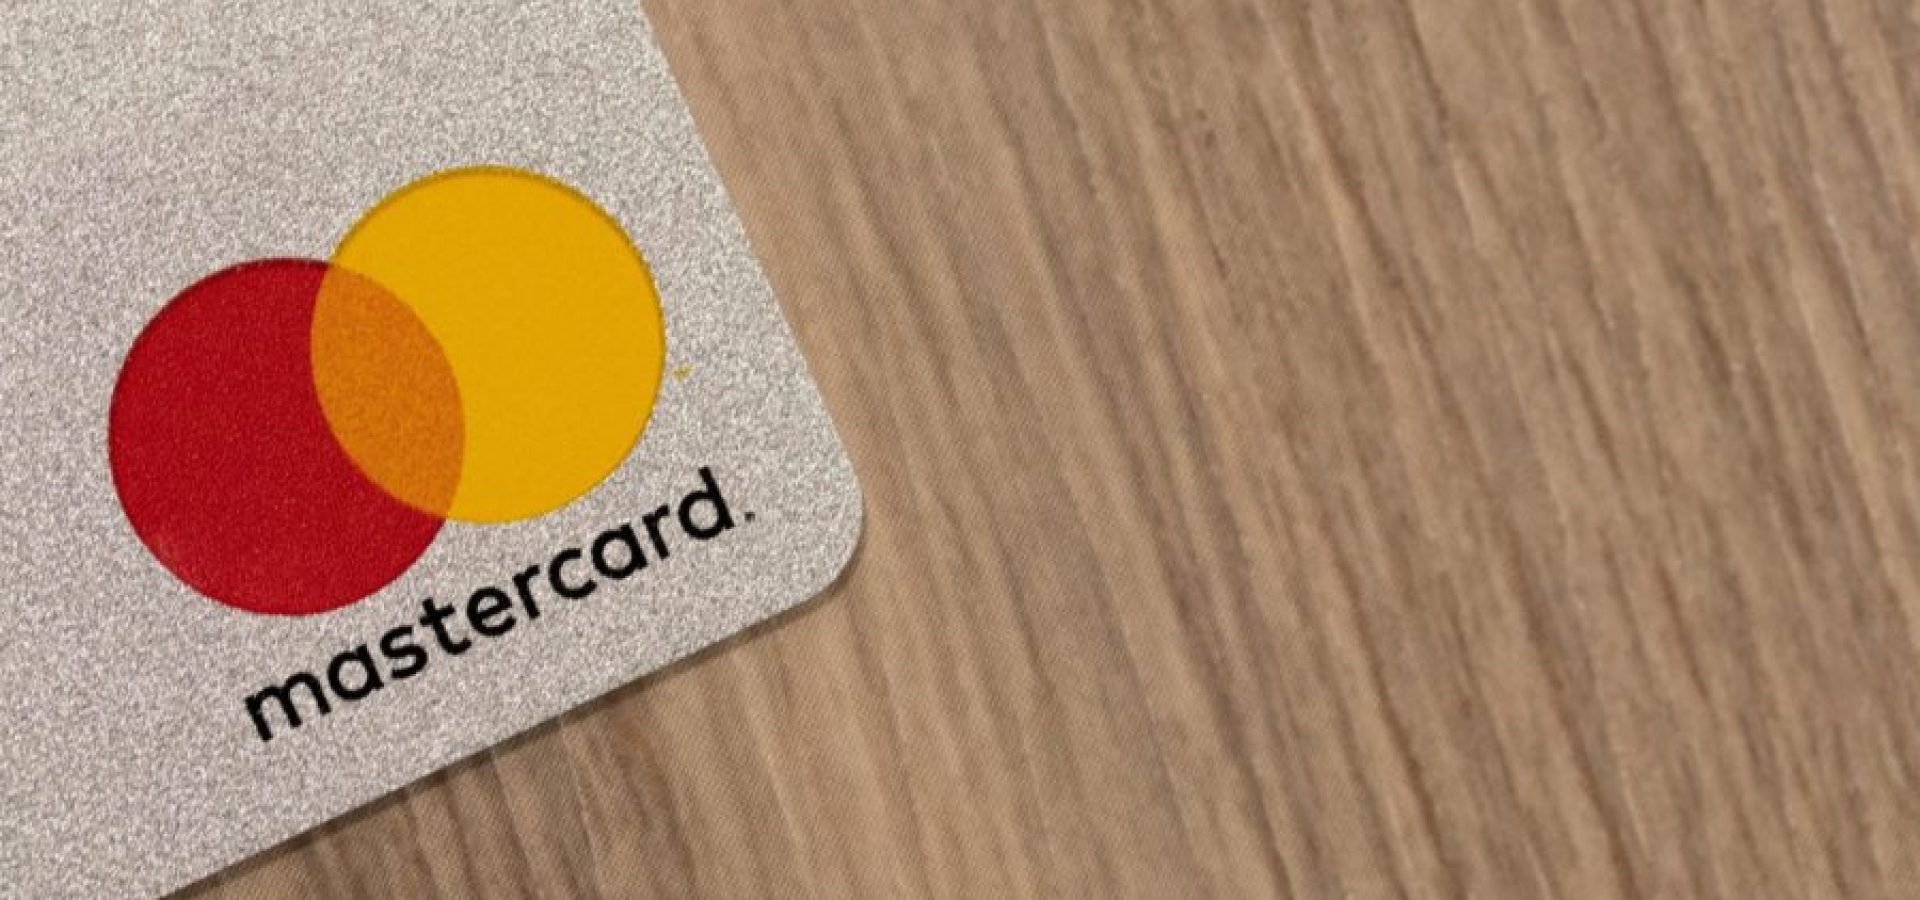 Mastercard and new opportunities